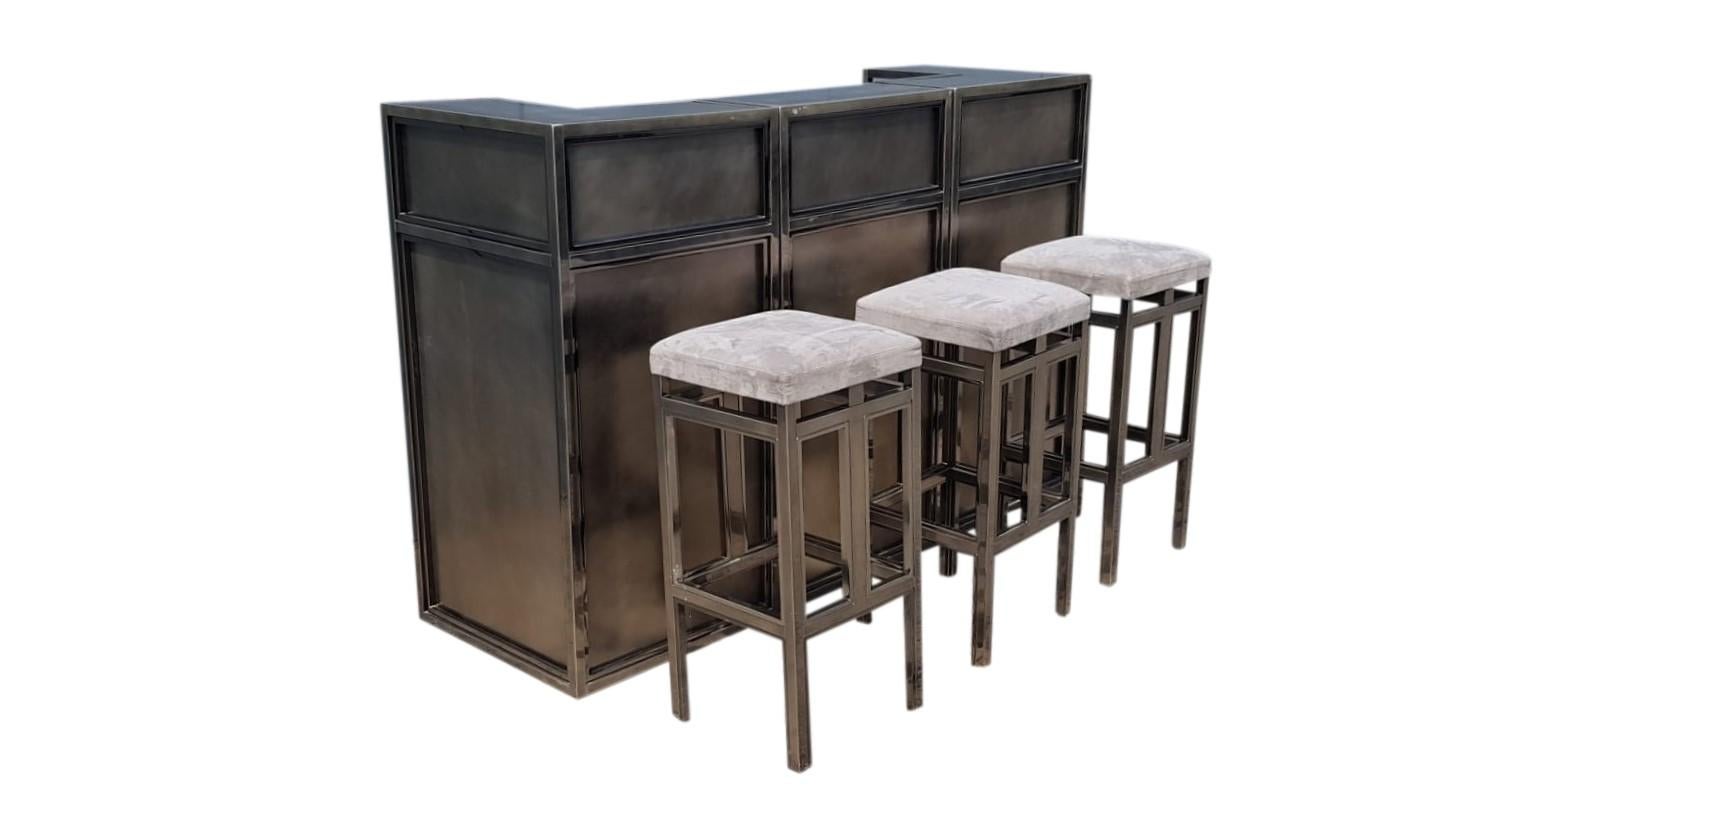 Hollywood regency 3-module bar counter made from chrome and brushed steel panels with three matching bar stools.

This high quality bar is a real eye catcher and has a very luxurious appeal.

Good condition.

1970s - France

Length : 180